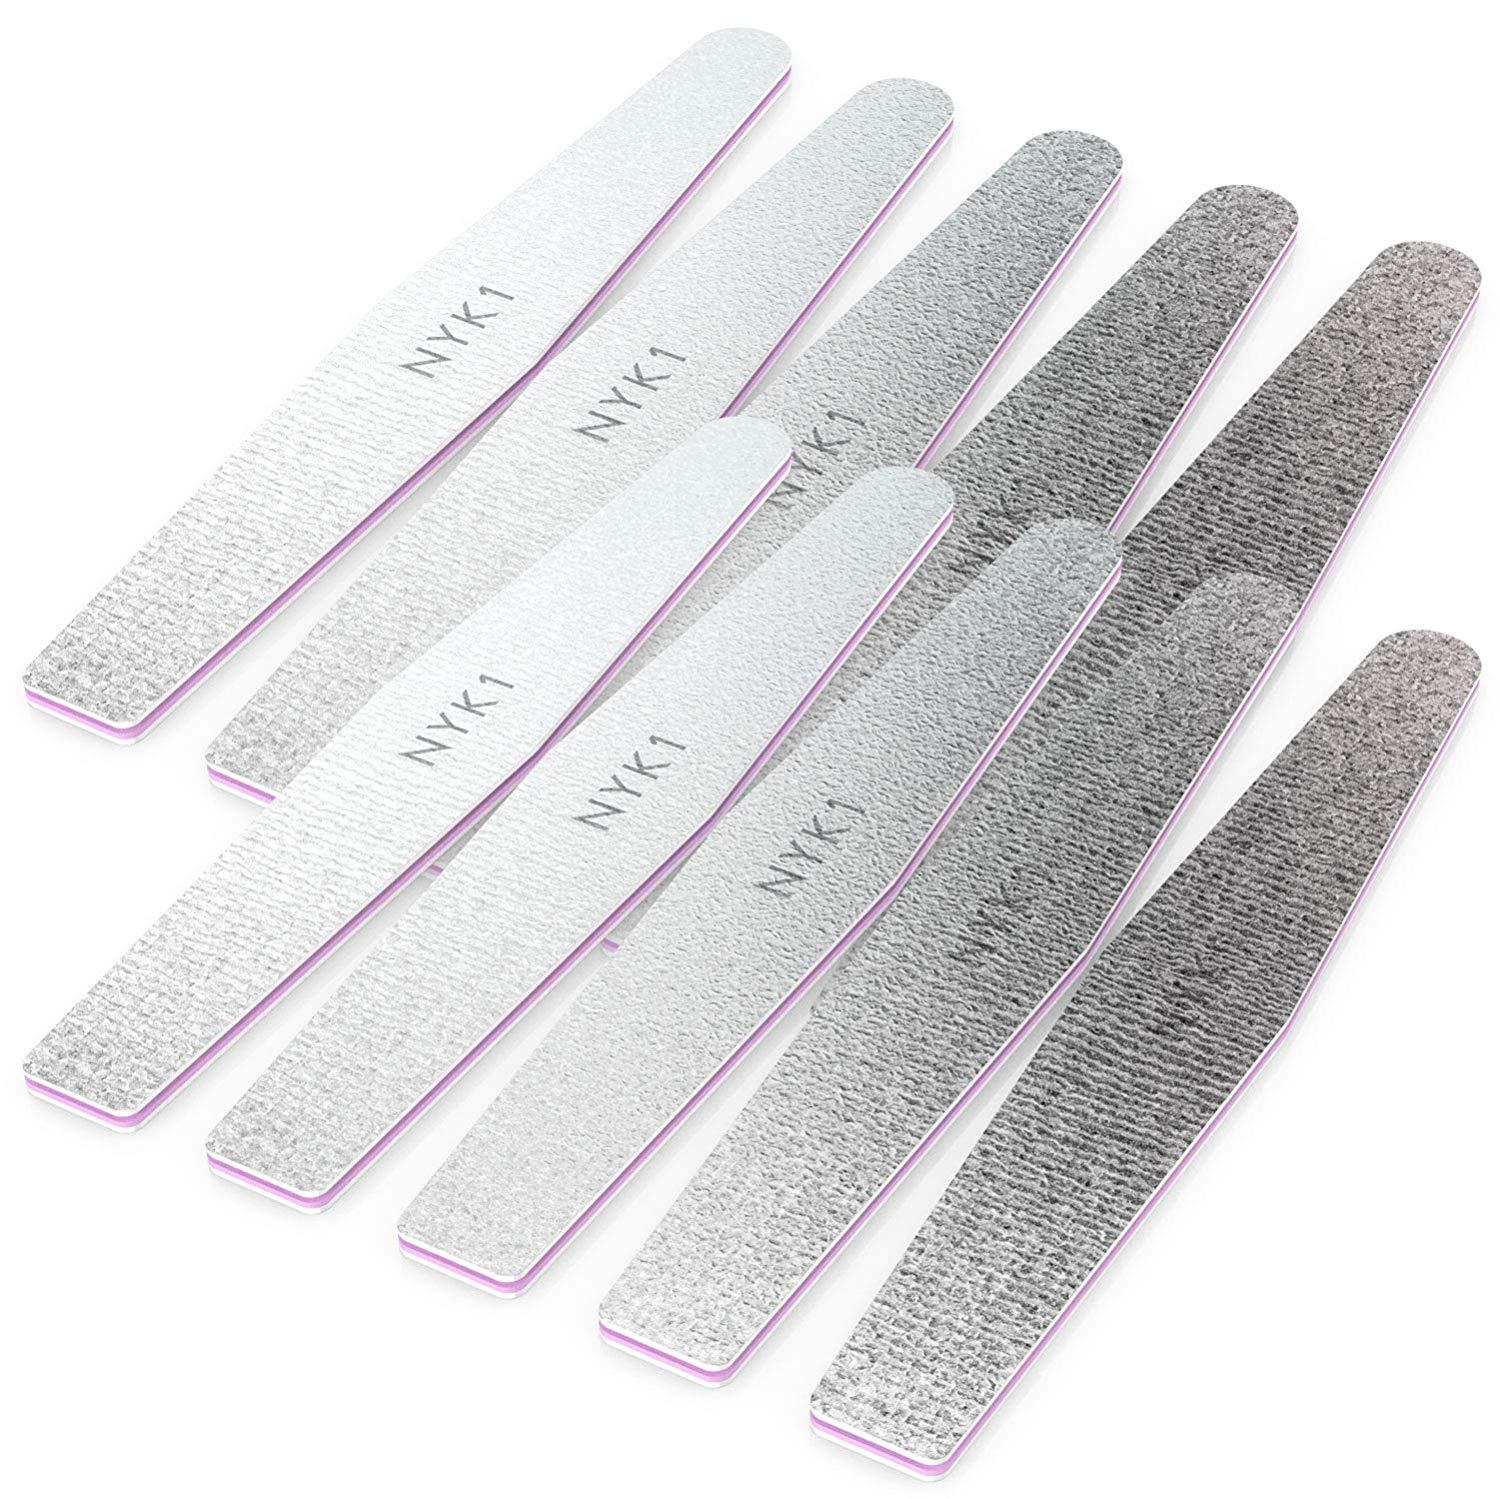 INTREPIDE natural stone nail file – Clever Beauty